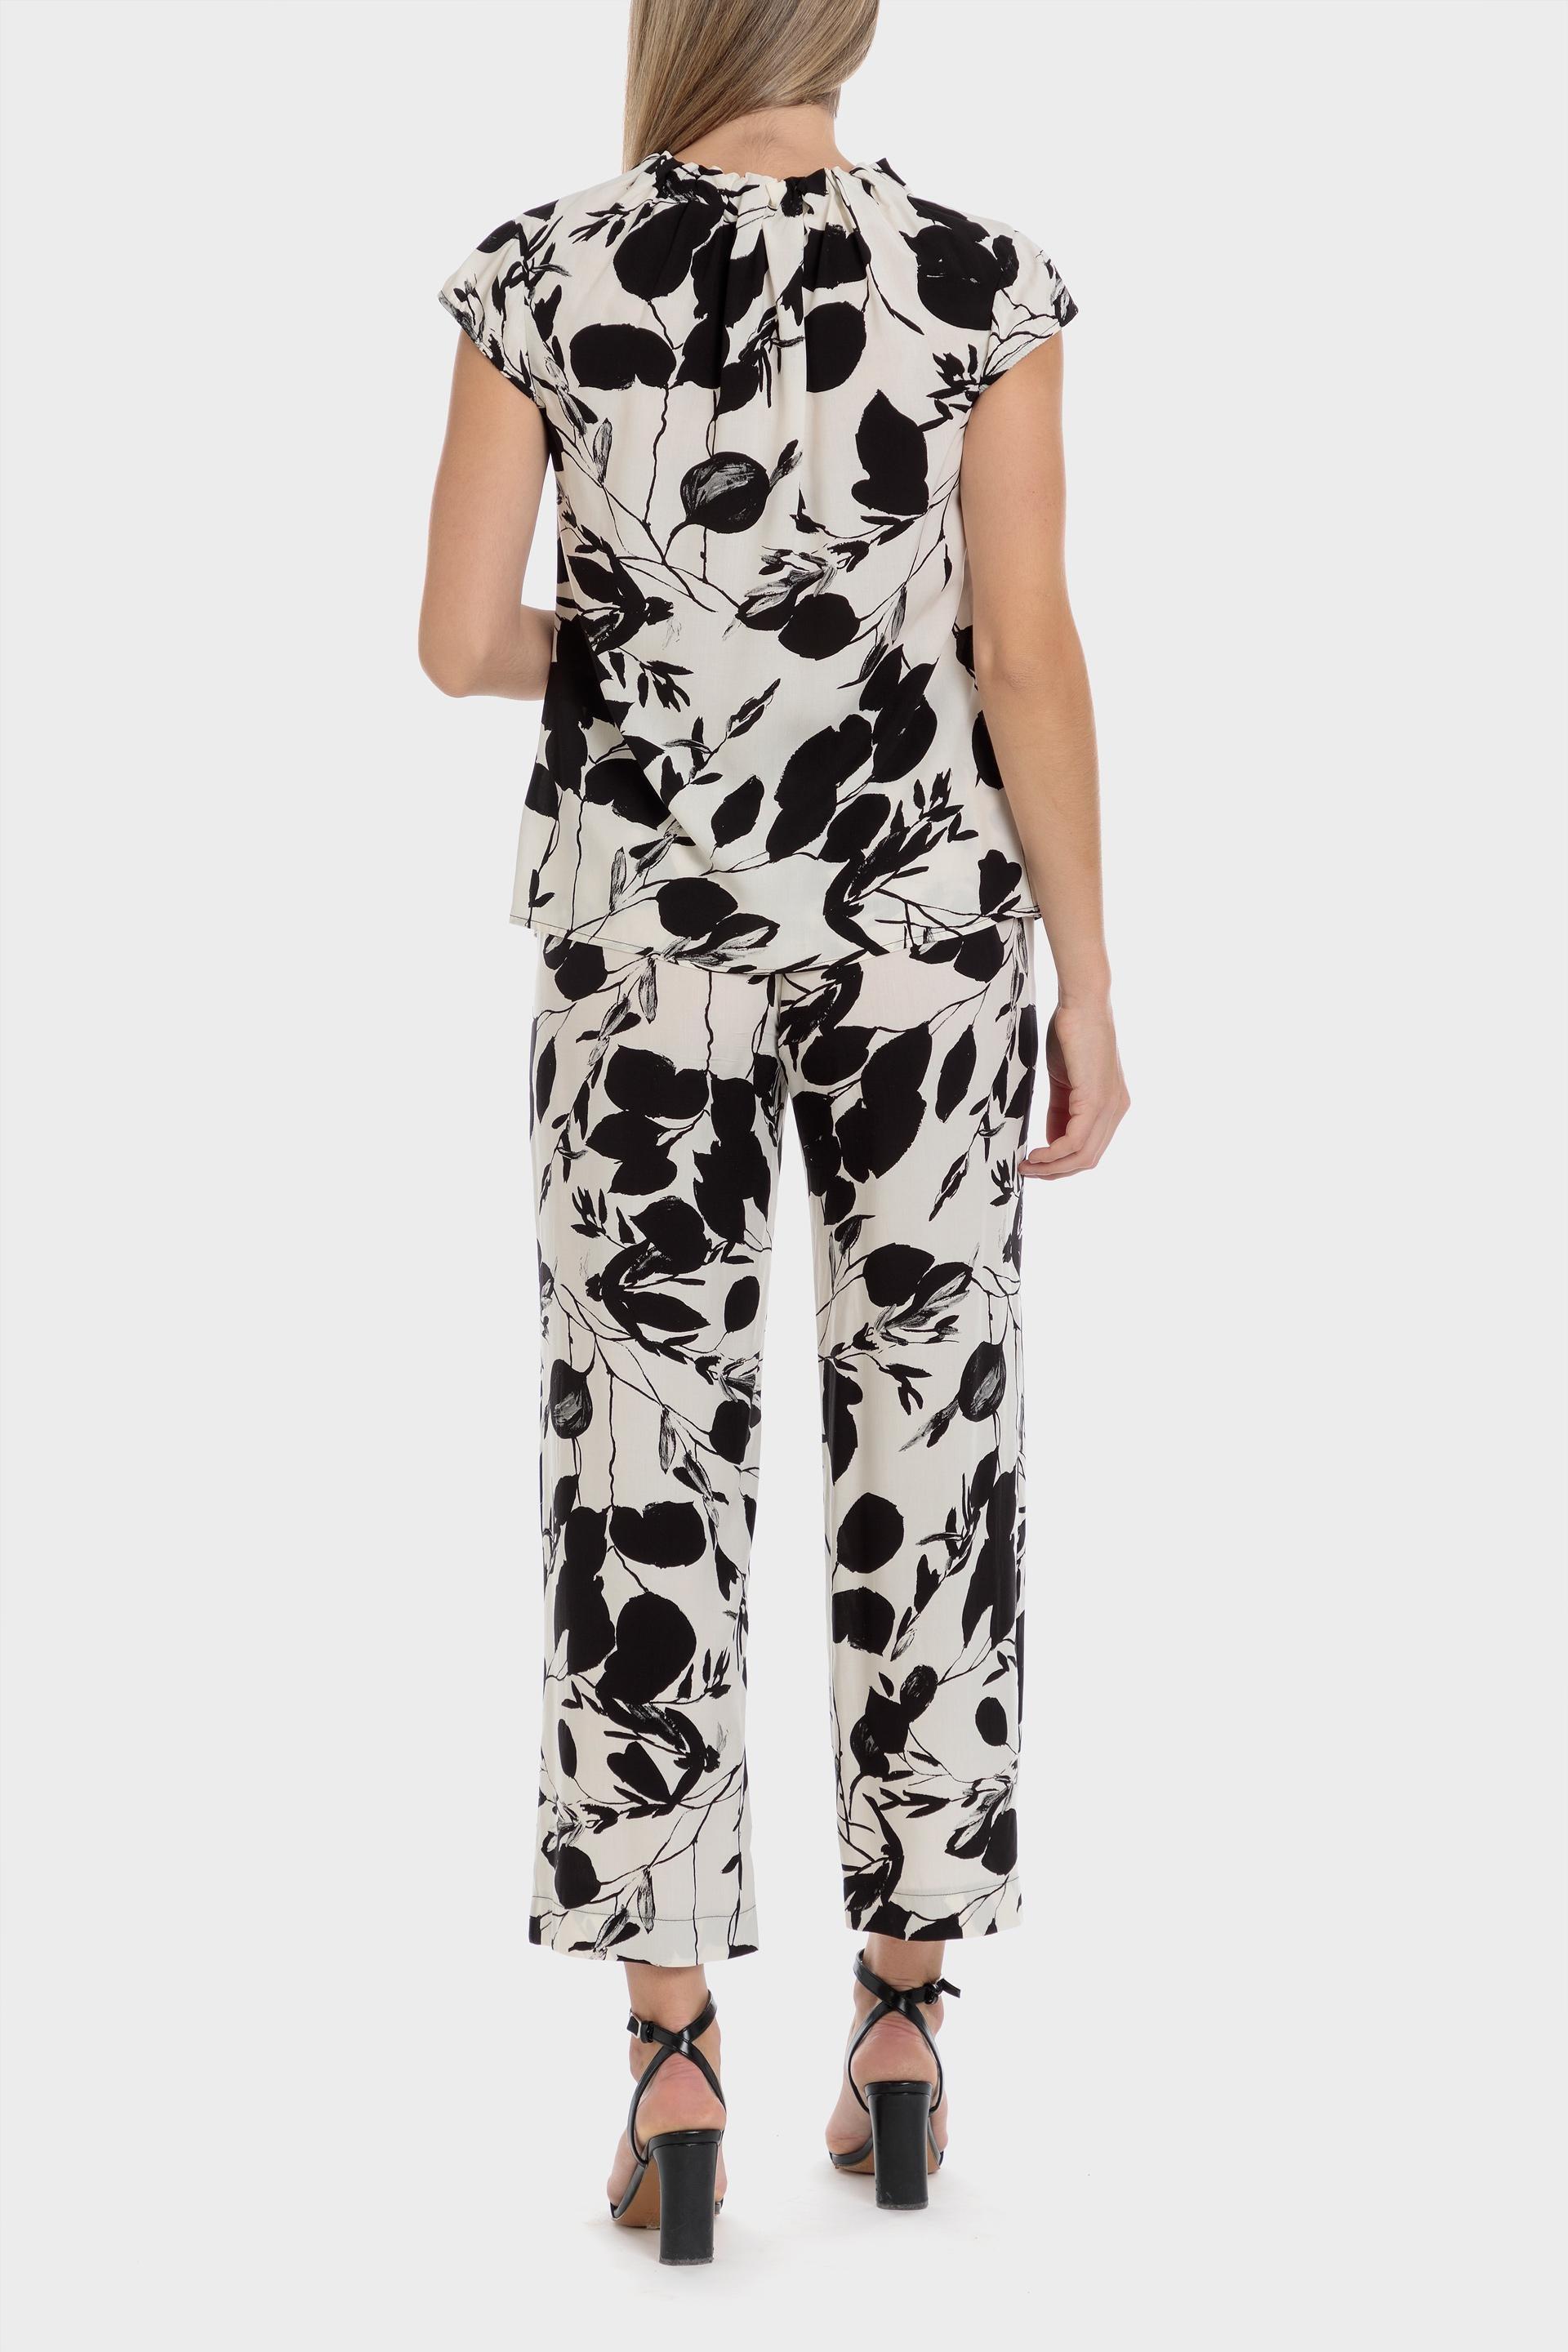 Punt Roma - Multicolour Printed Trousers